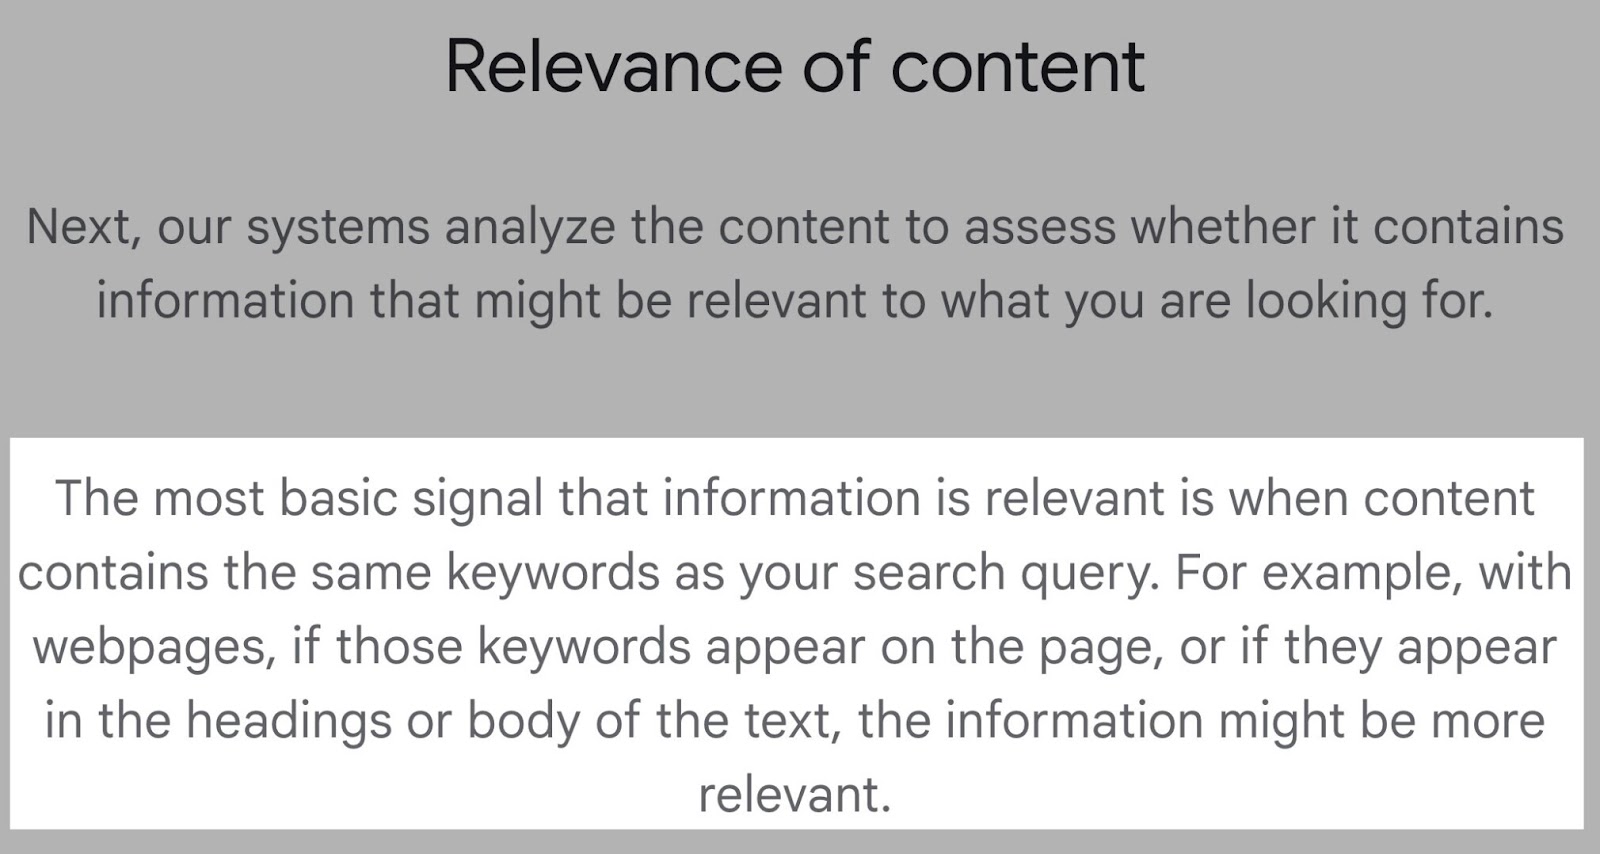 "Relevance of content" section of Google’s ranking factors